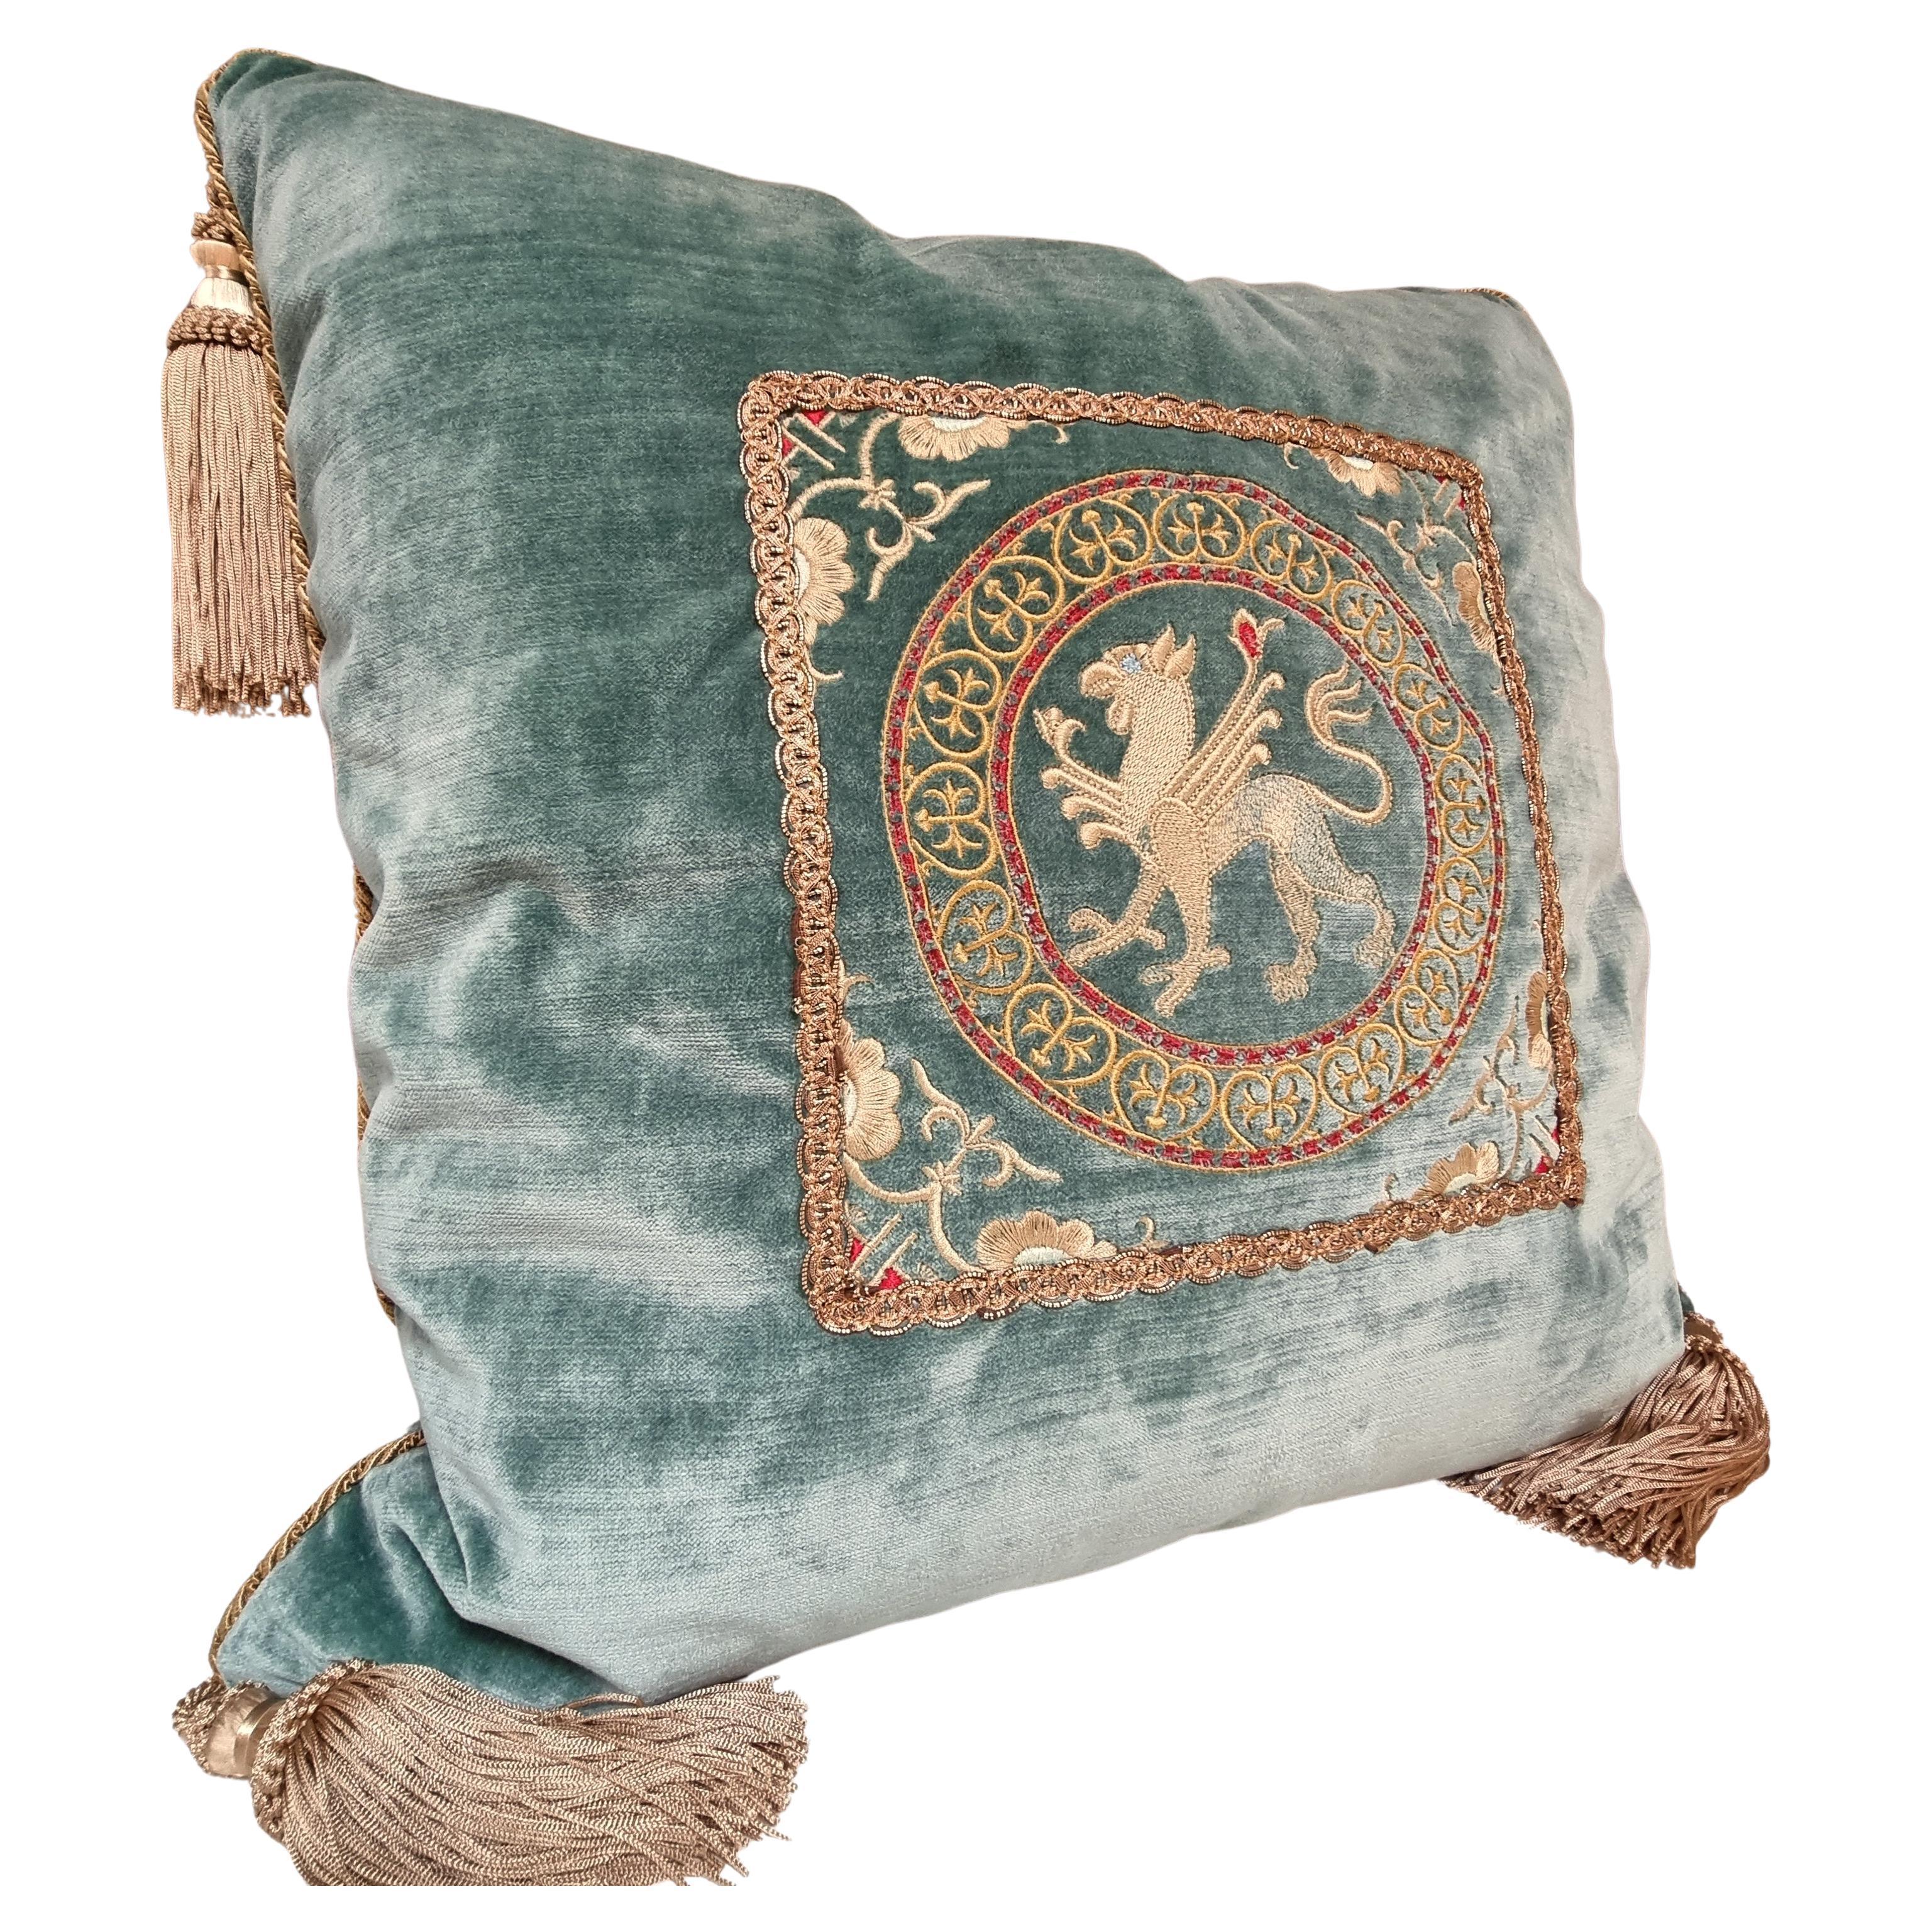 This amazing decorative pillow with beige tassel at the four corners is handmade using Rubelli  velvet in aqua color on both sides finished with Houlès  twisted lip cord, embellished with precious embroideries (13th-century design) framed with flat